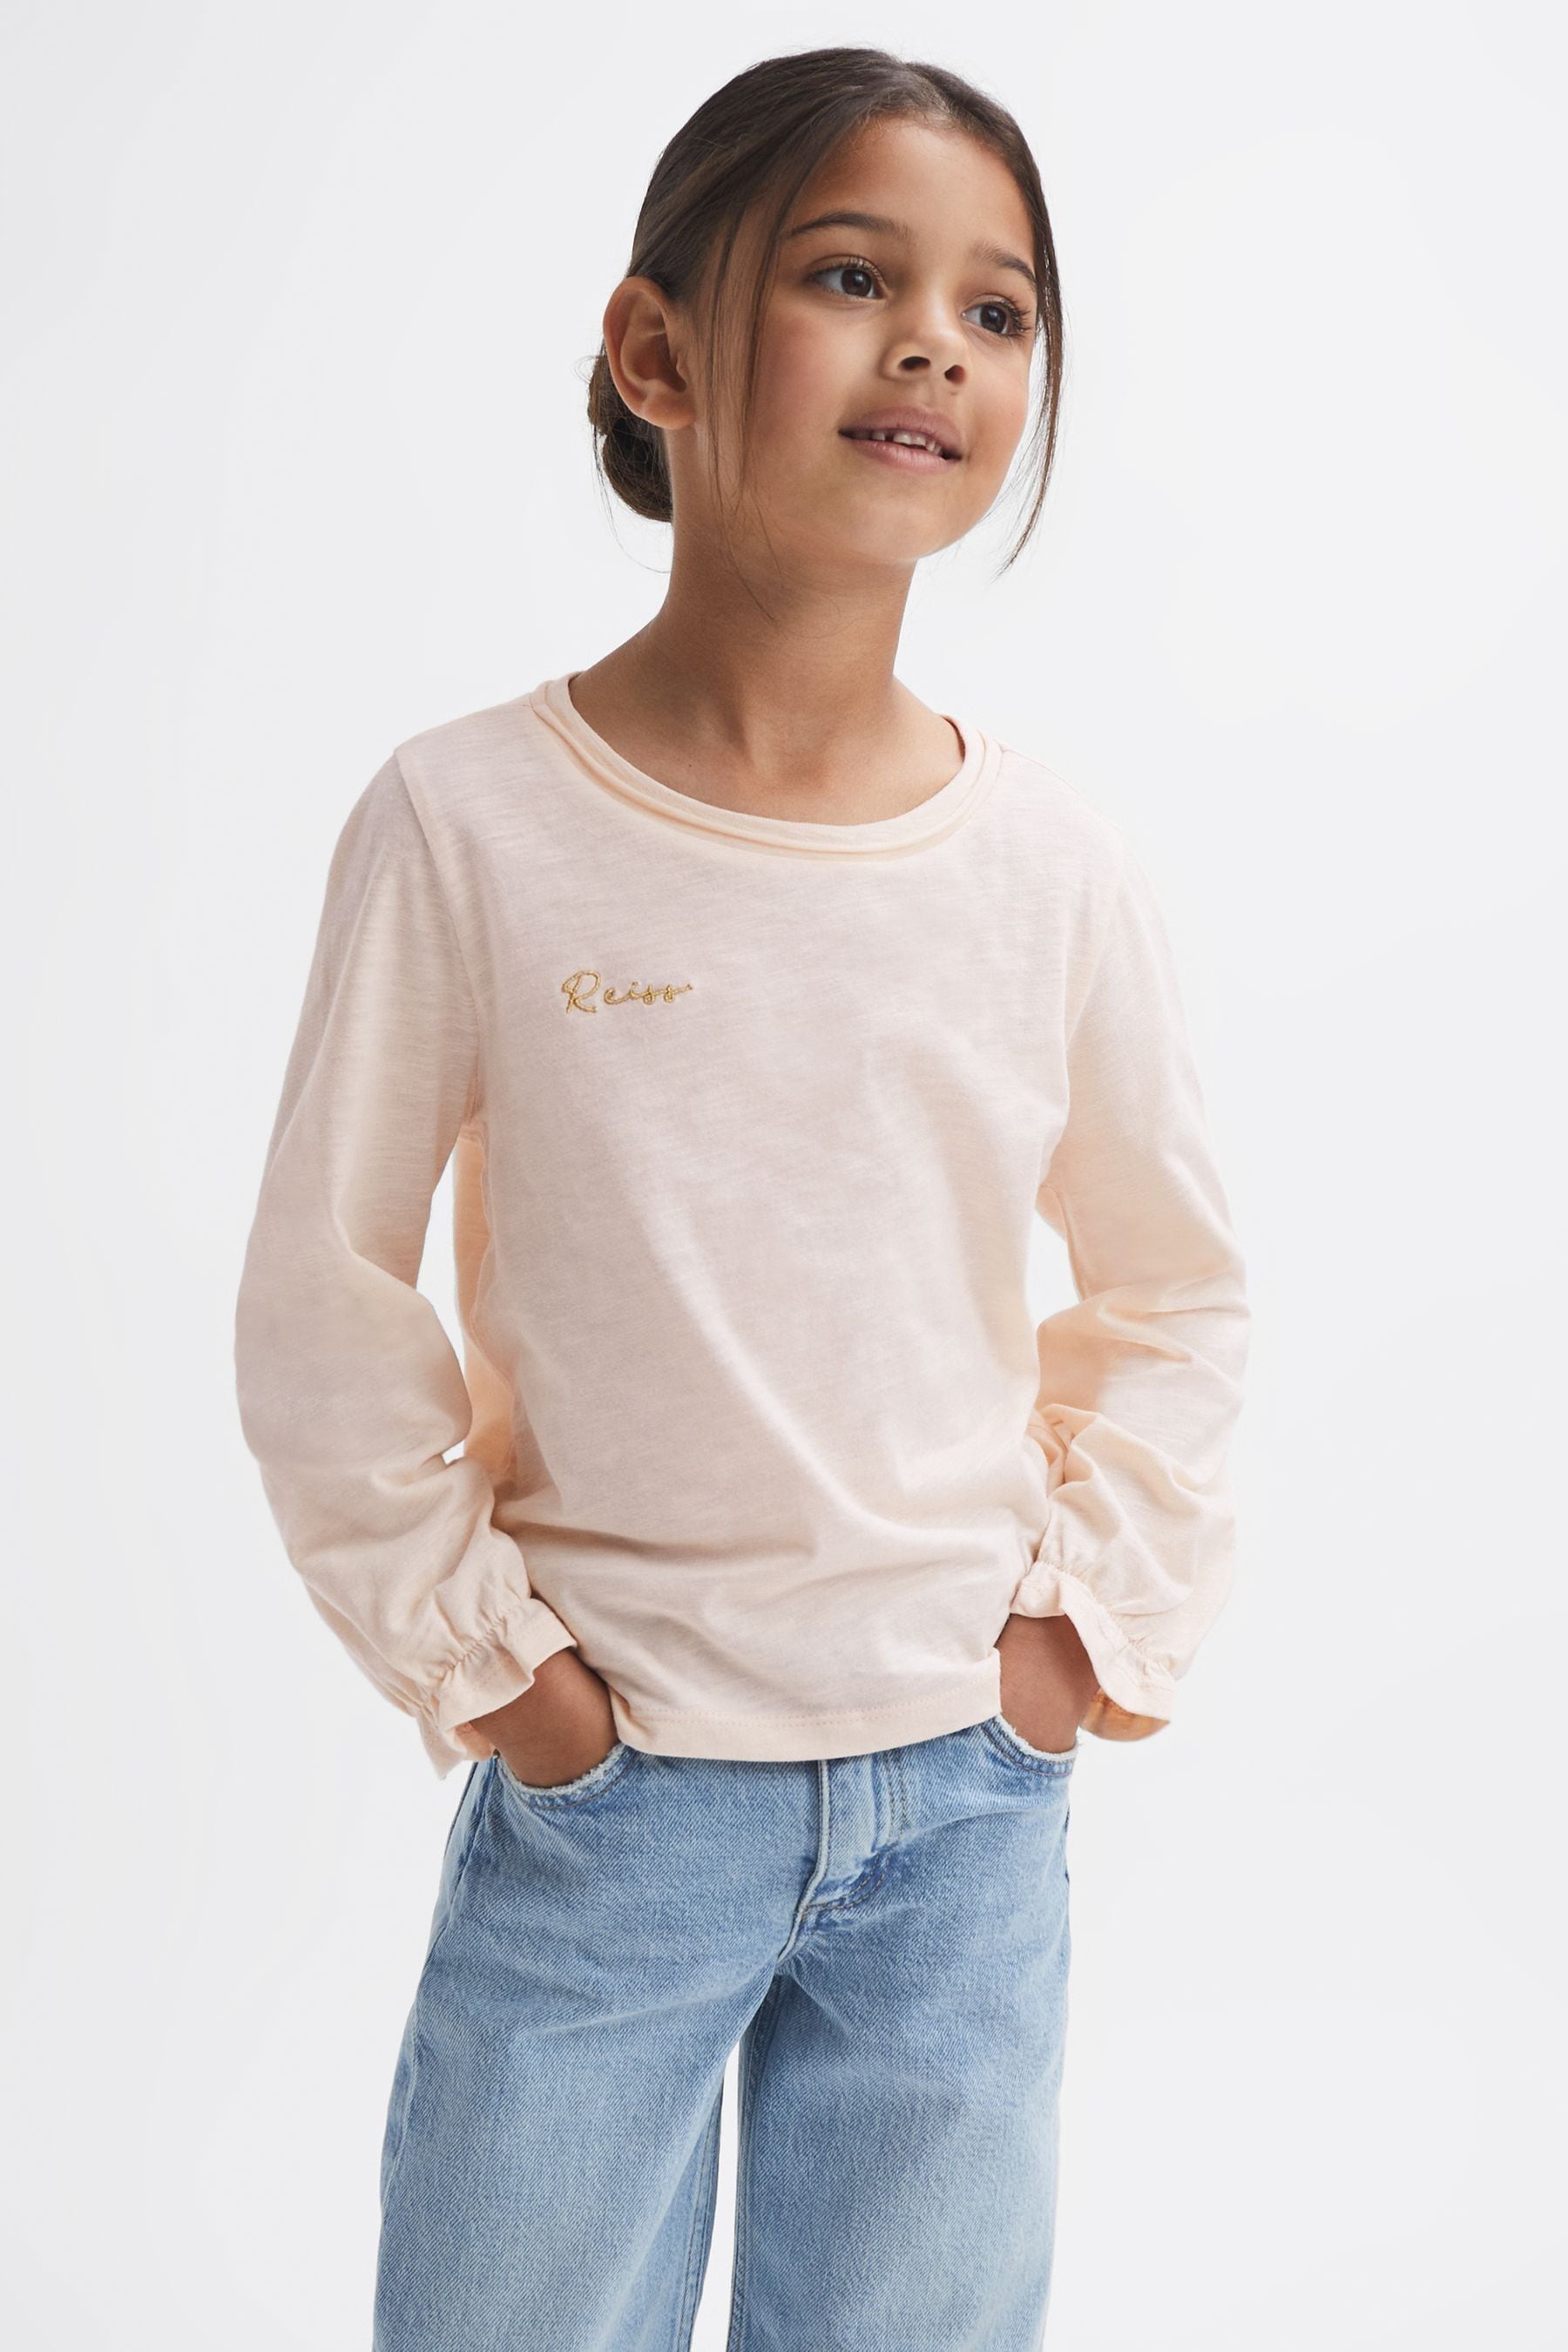 Reiss Kids' Rain - Ivory Junior Cotton Embroidered T-shirt, Age 4-5 Years